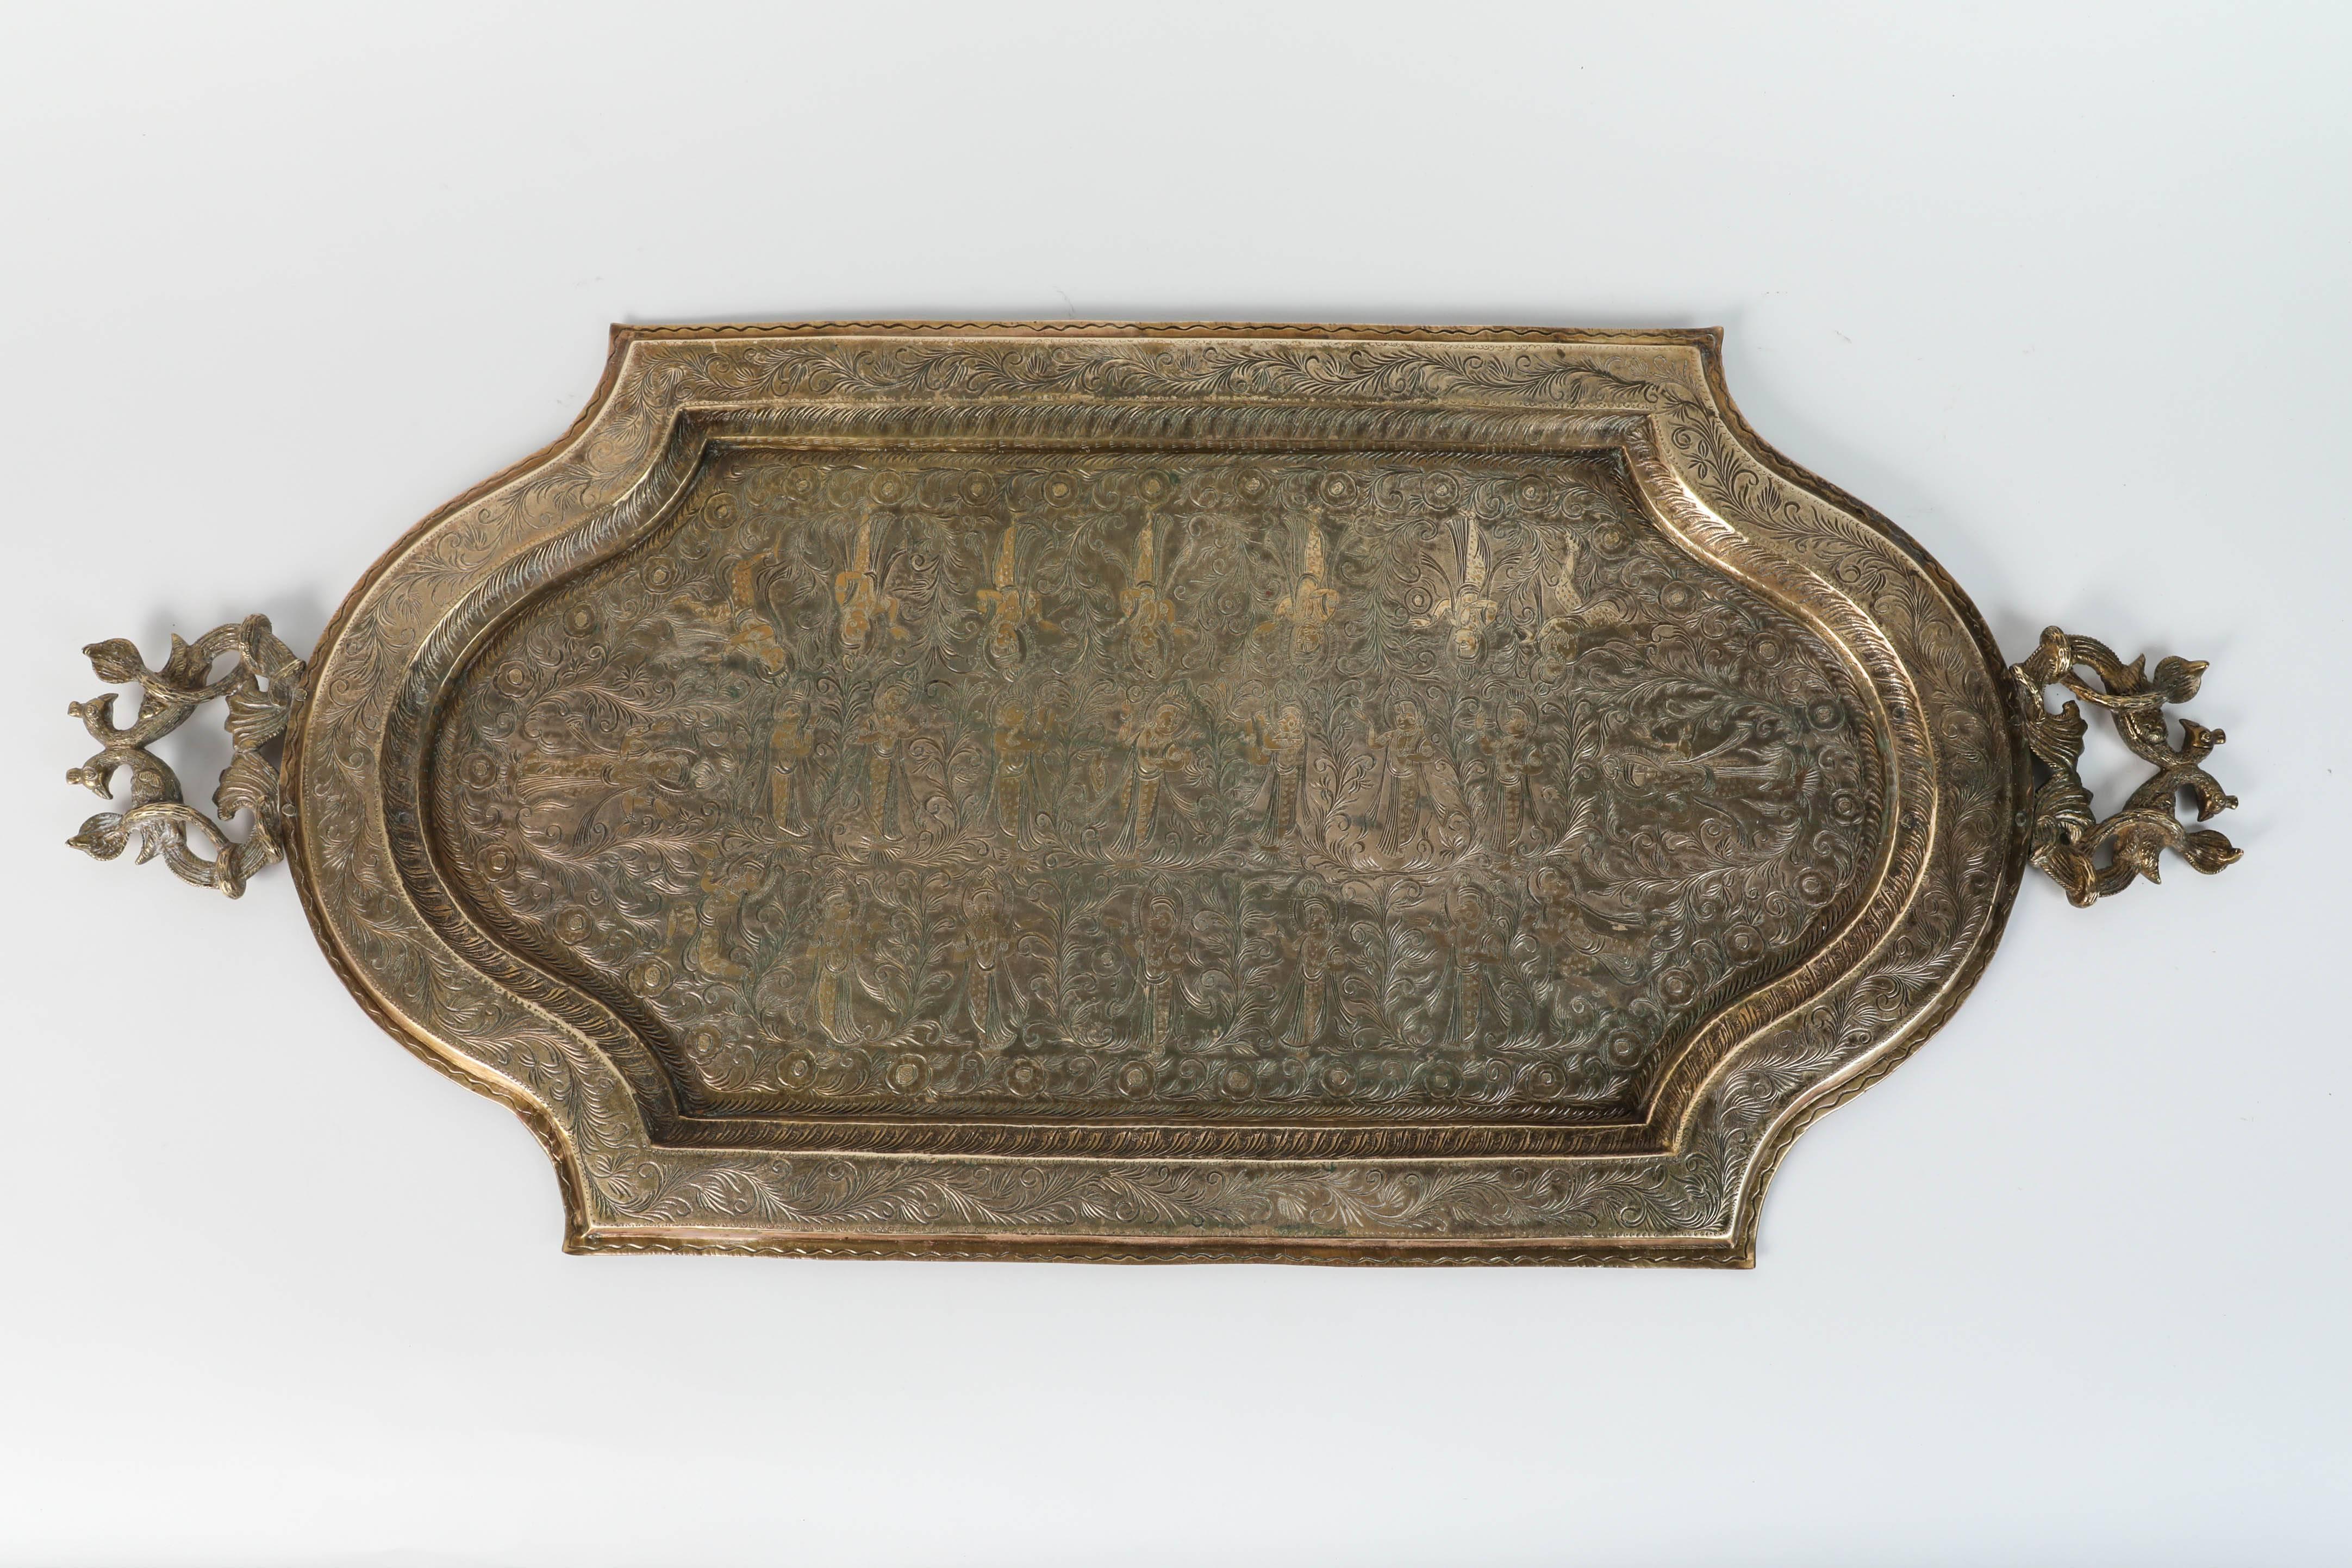 A large antique Mughal Mamluk revival Indo Persian brass charger serving tray.
Engraved and finely decorated with Buddhist Goddess figures and Moorish geometric designs.
Brass repoussé floral and foliate motif to the tray with peacock as well as